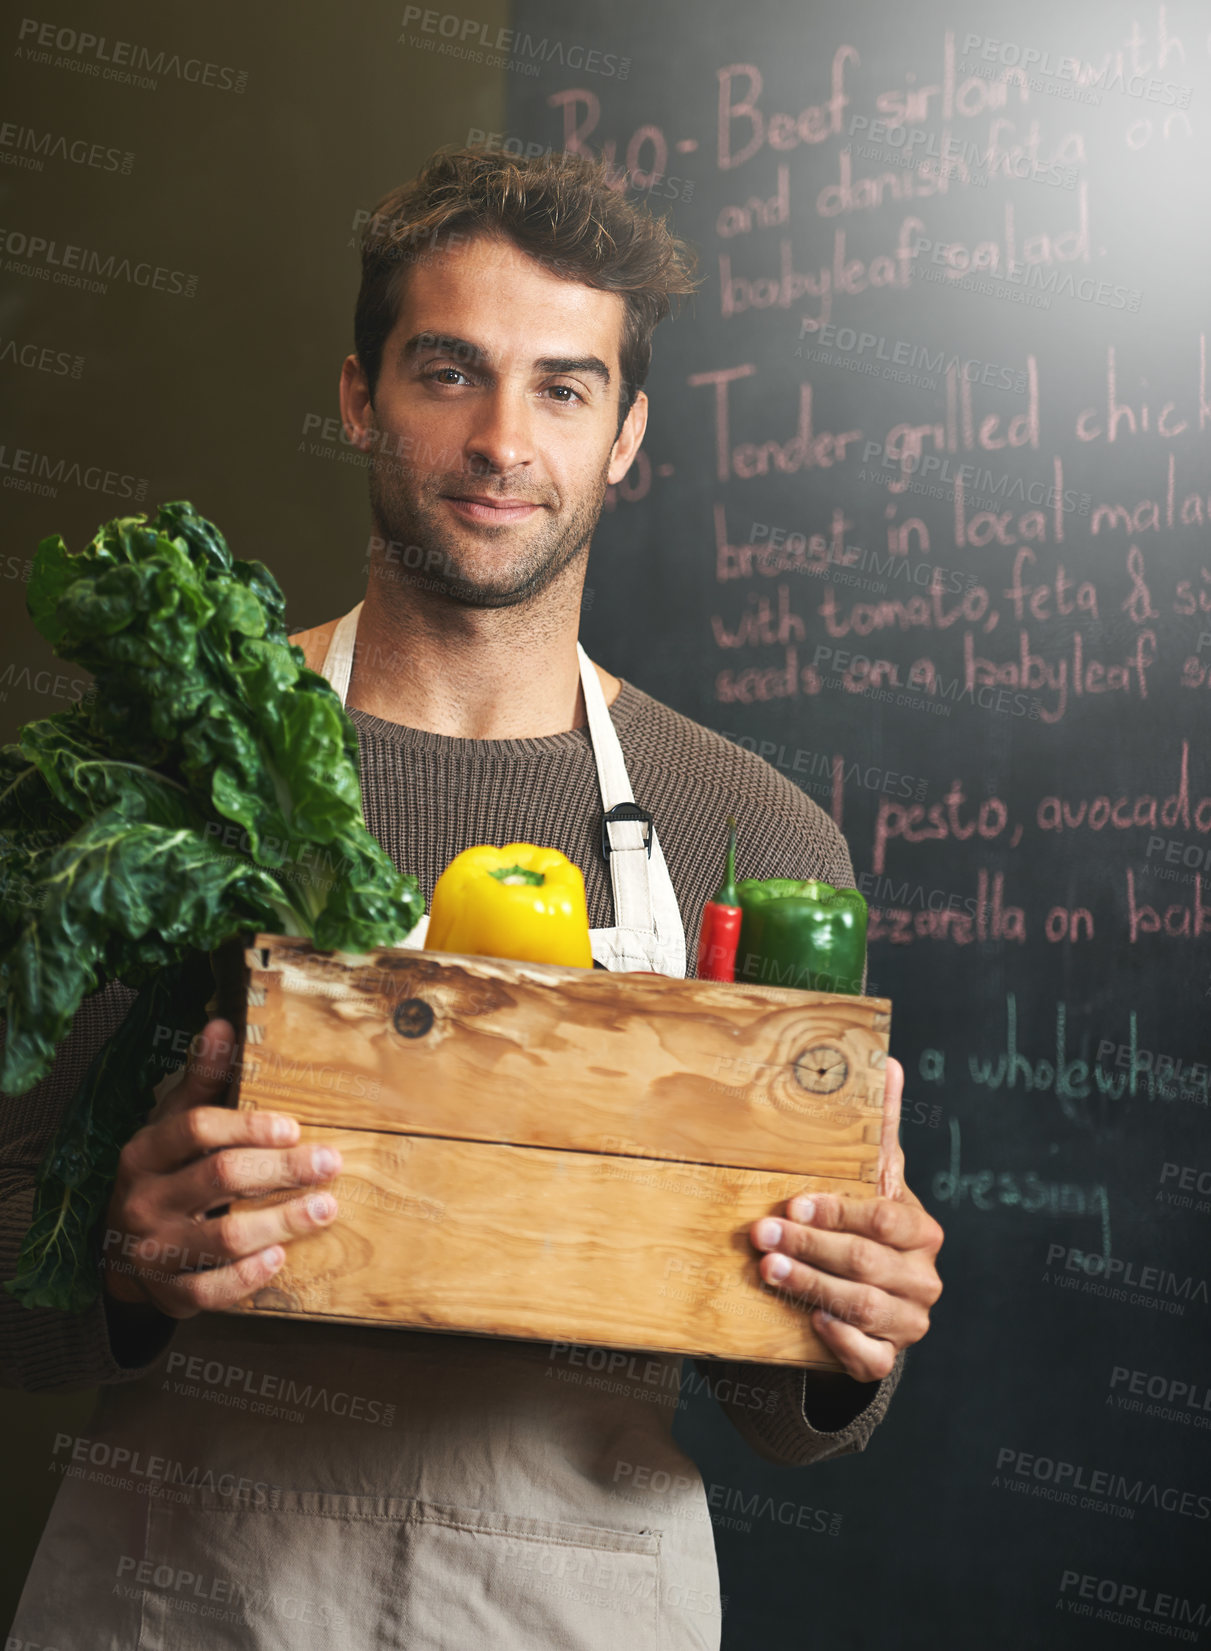 Buy stock photo Shot of a young man holding a crate full of fresh vegetables in his kitchen